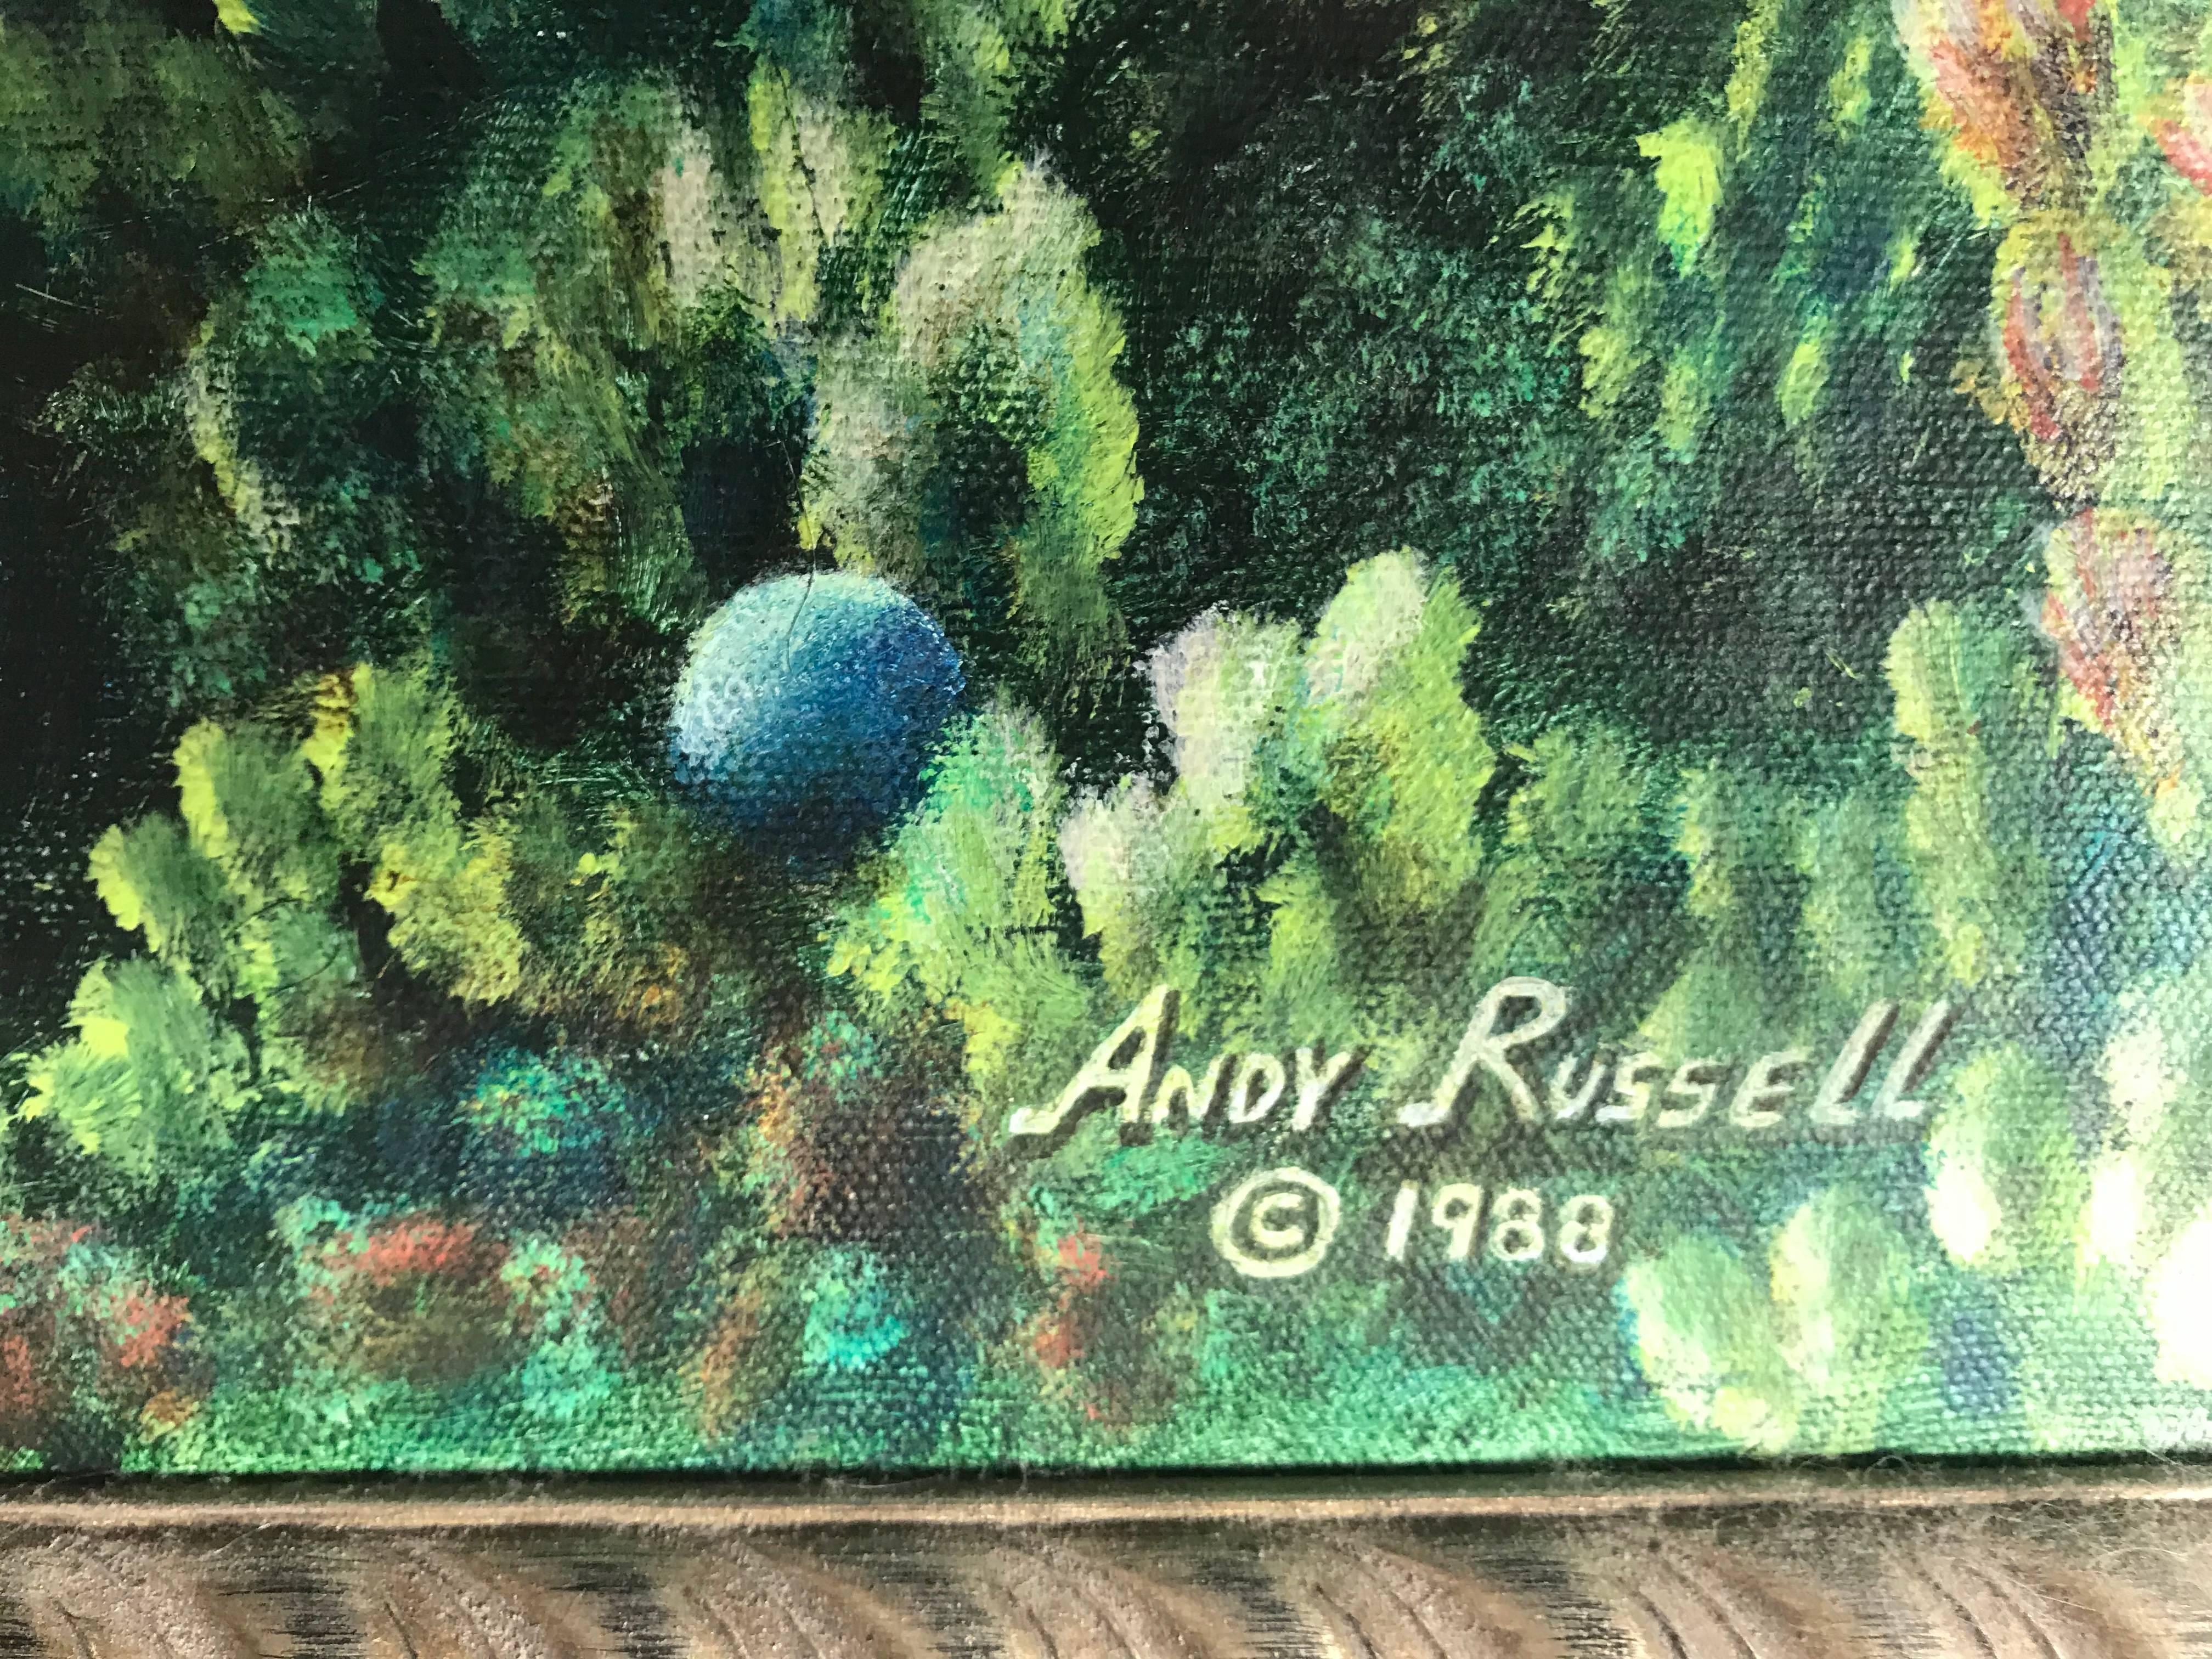 Hand-Painted Original Oil on Canvas Dreamscape by Andy Russell, Buffalo, NY